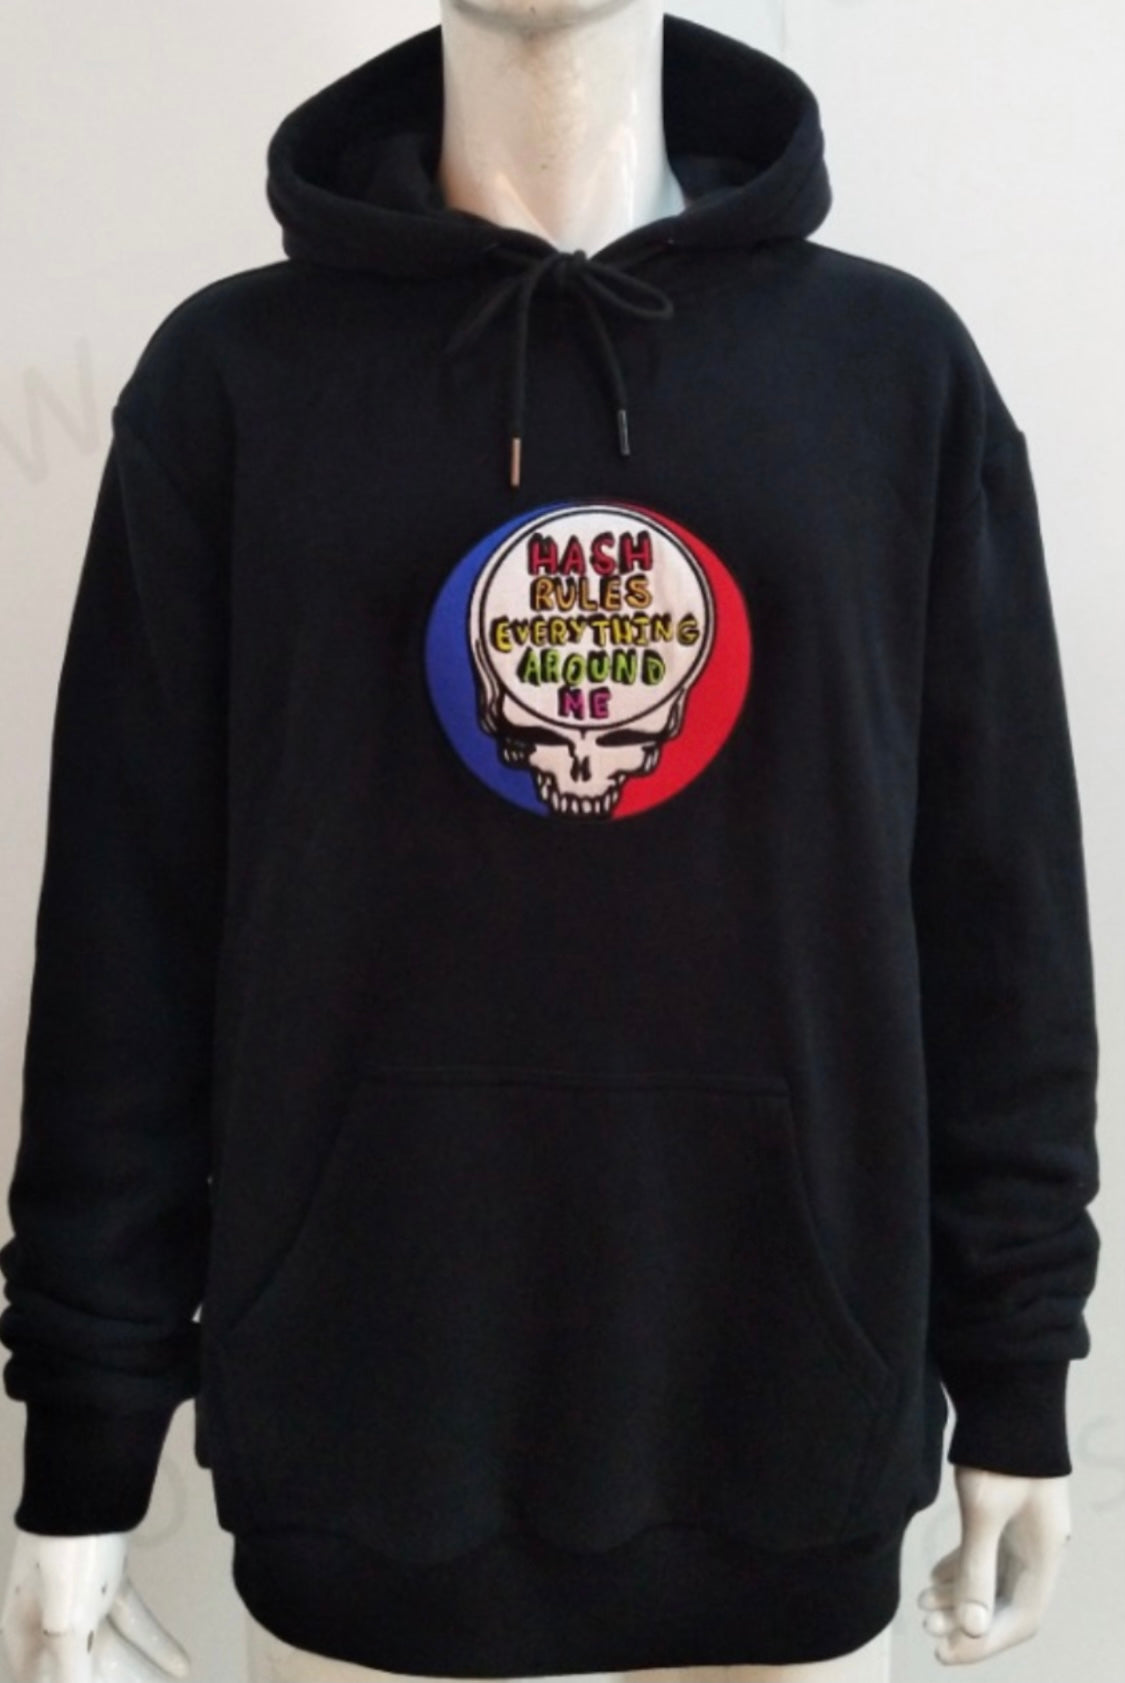 Hash Rules Everything Around Me Dead Hoodie